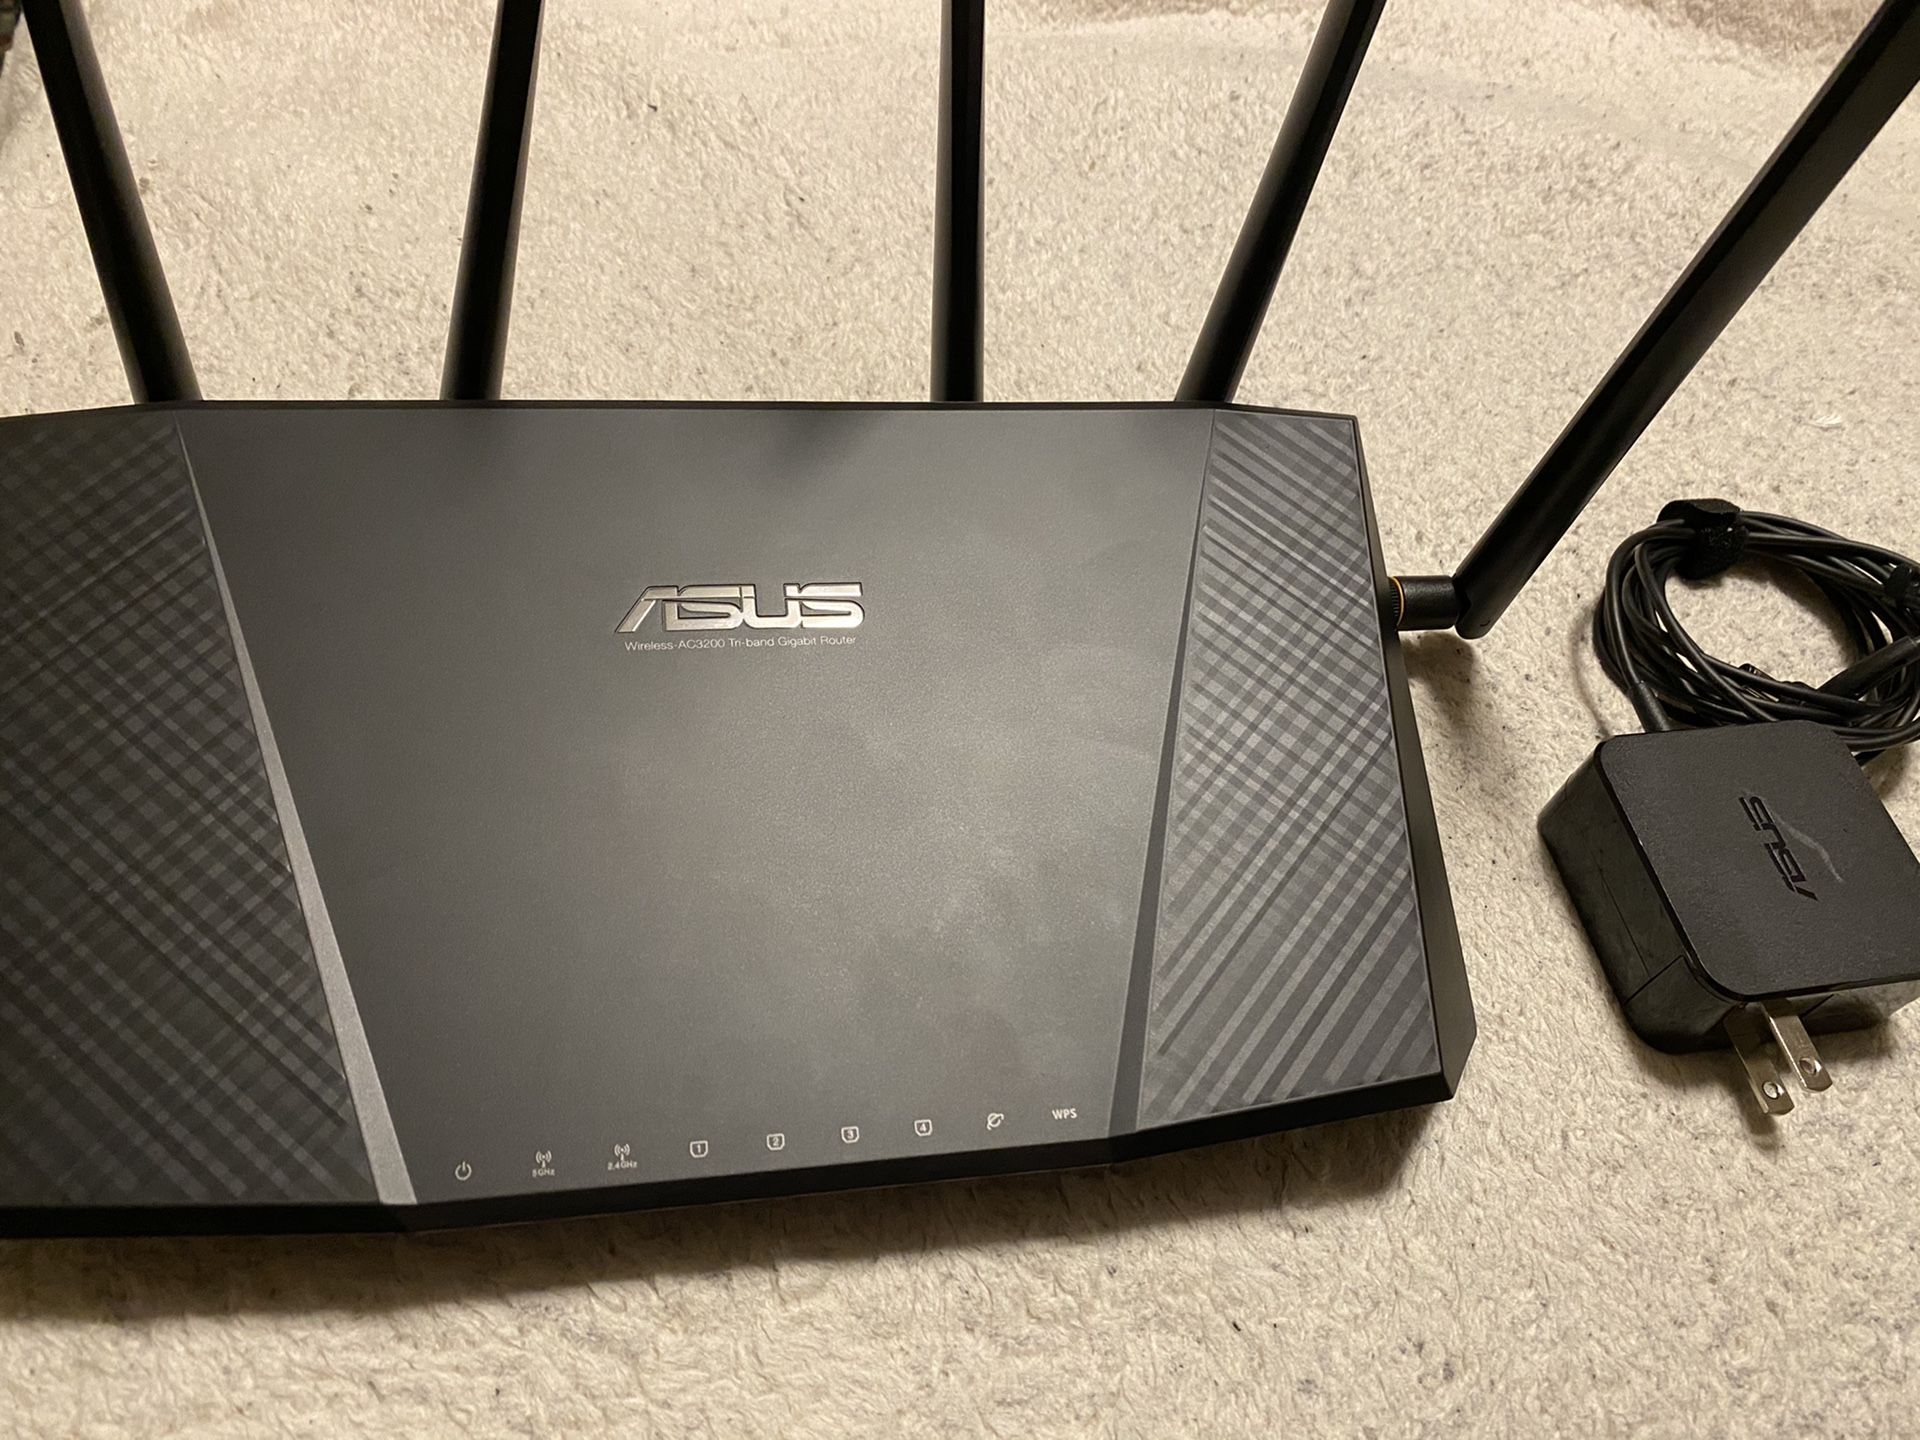 ASUS RT-AC3200 Tri-band MU-MIMO Router